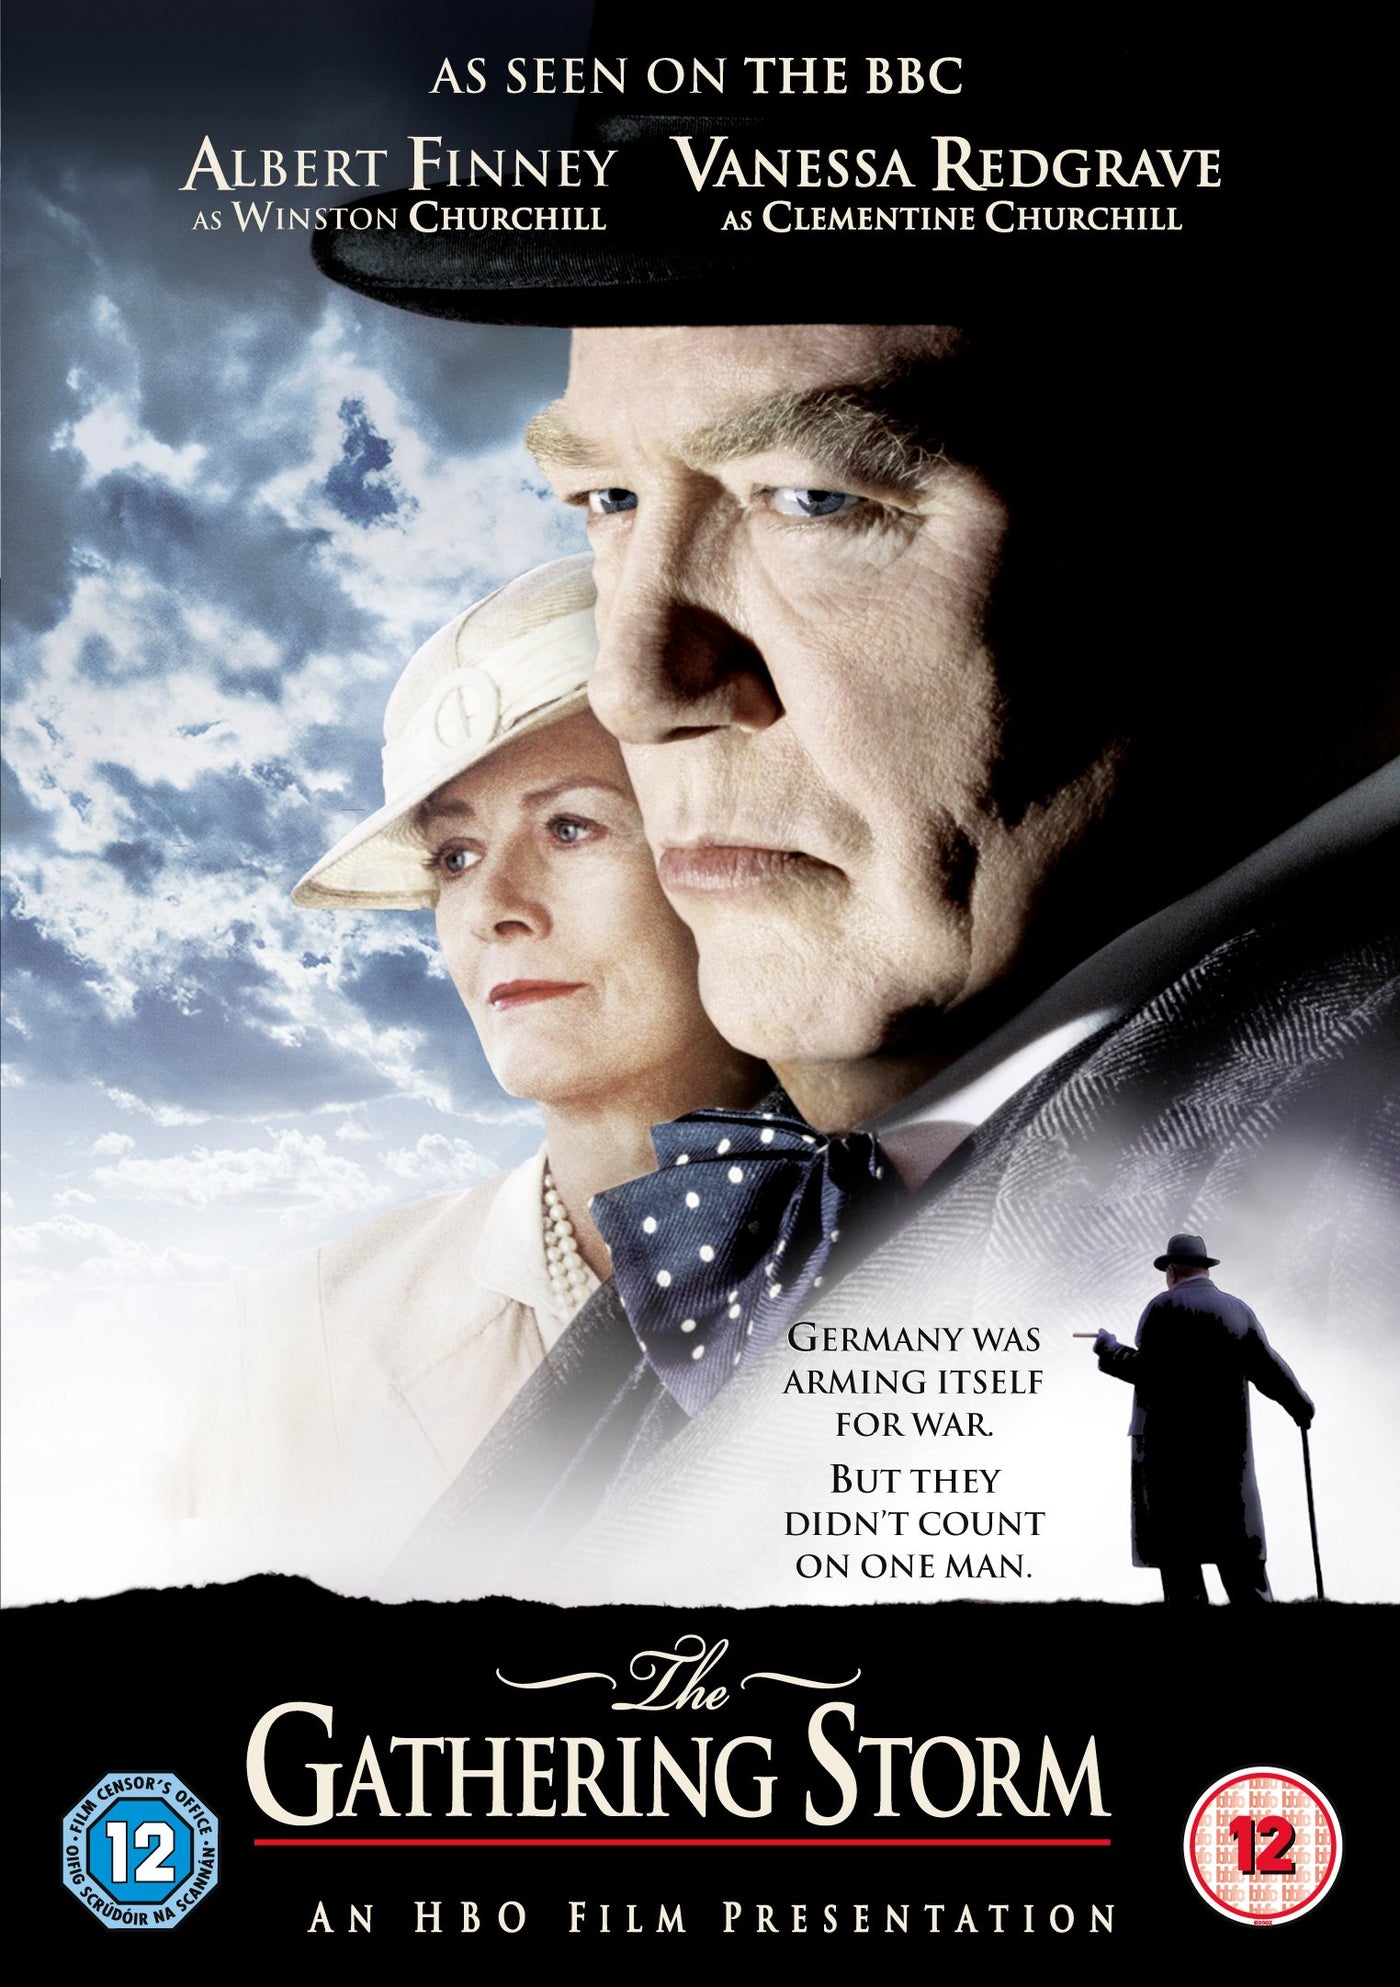 The Gathering Storm (DVD)